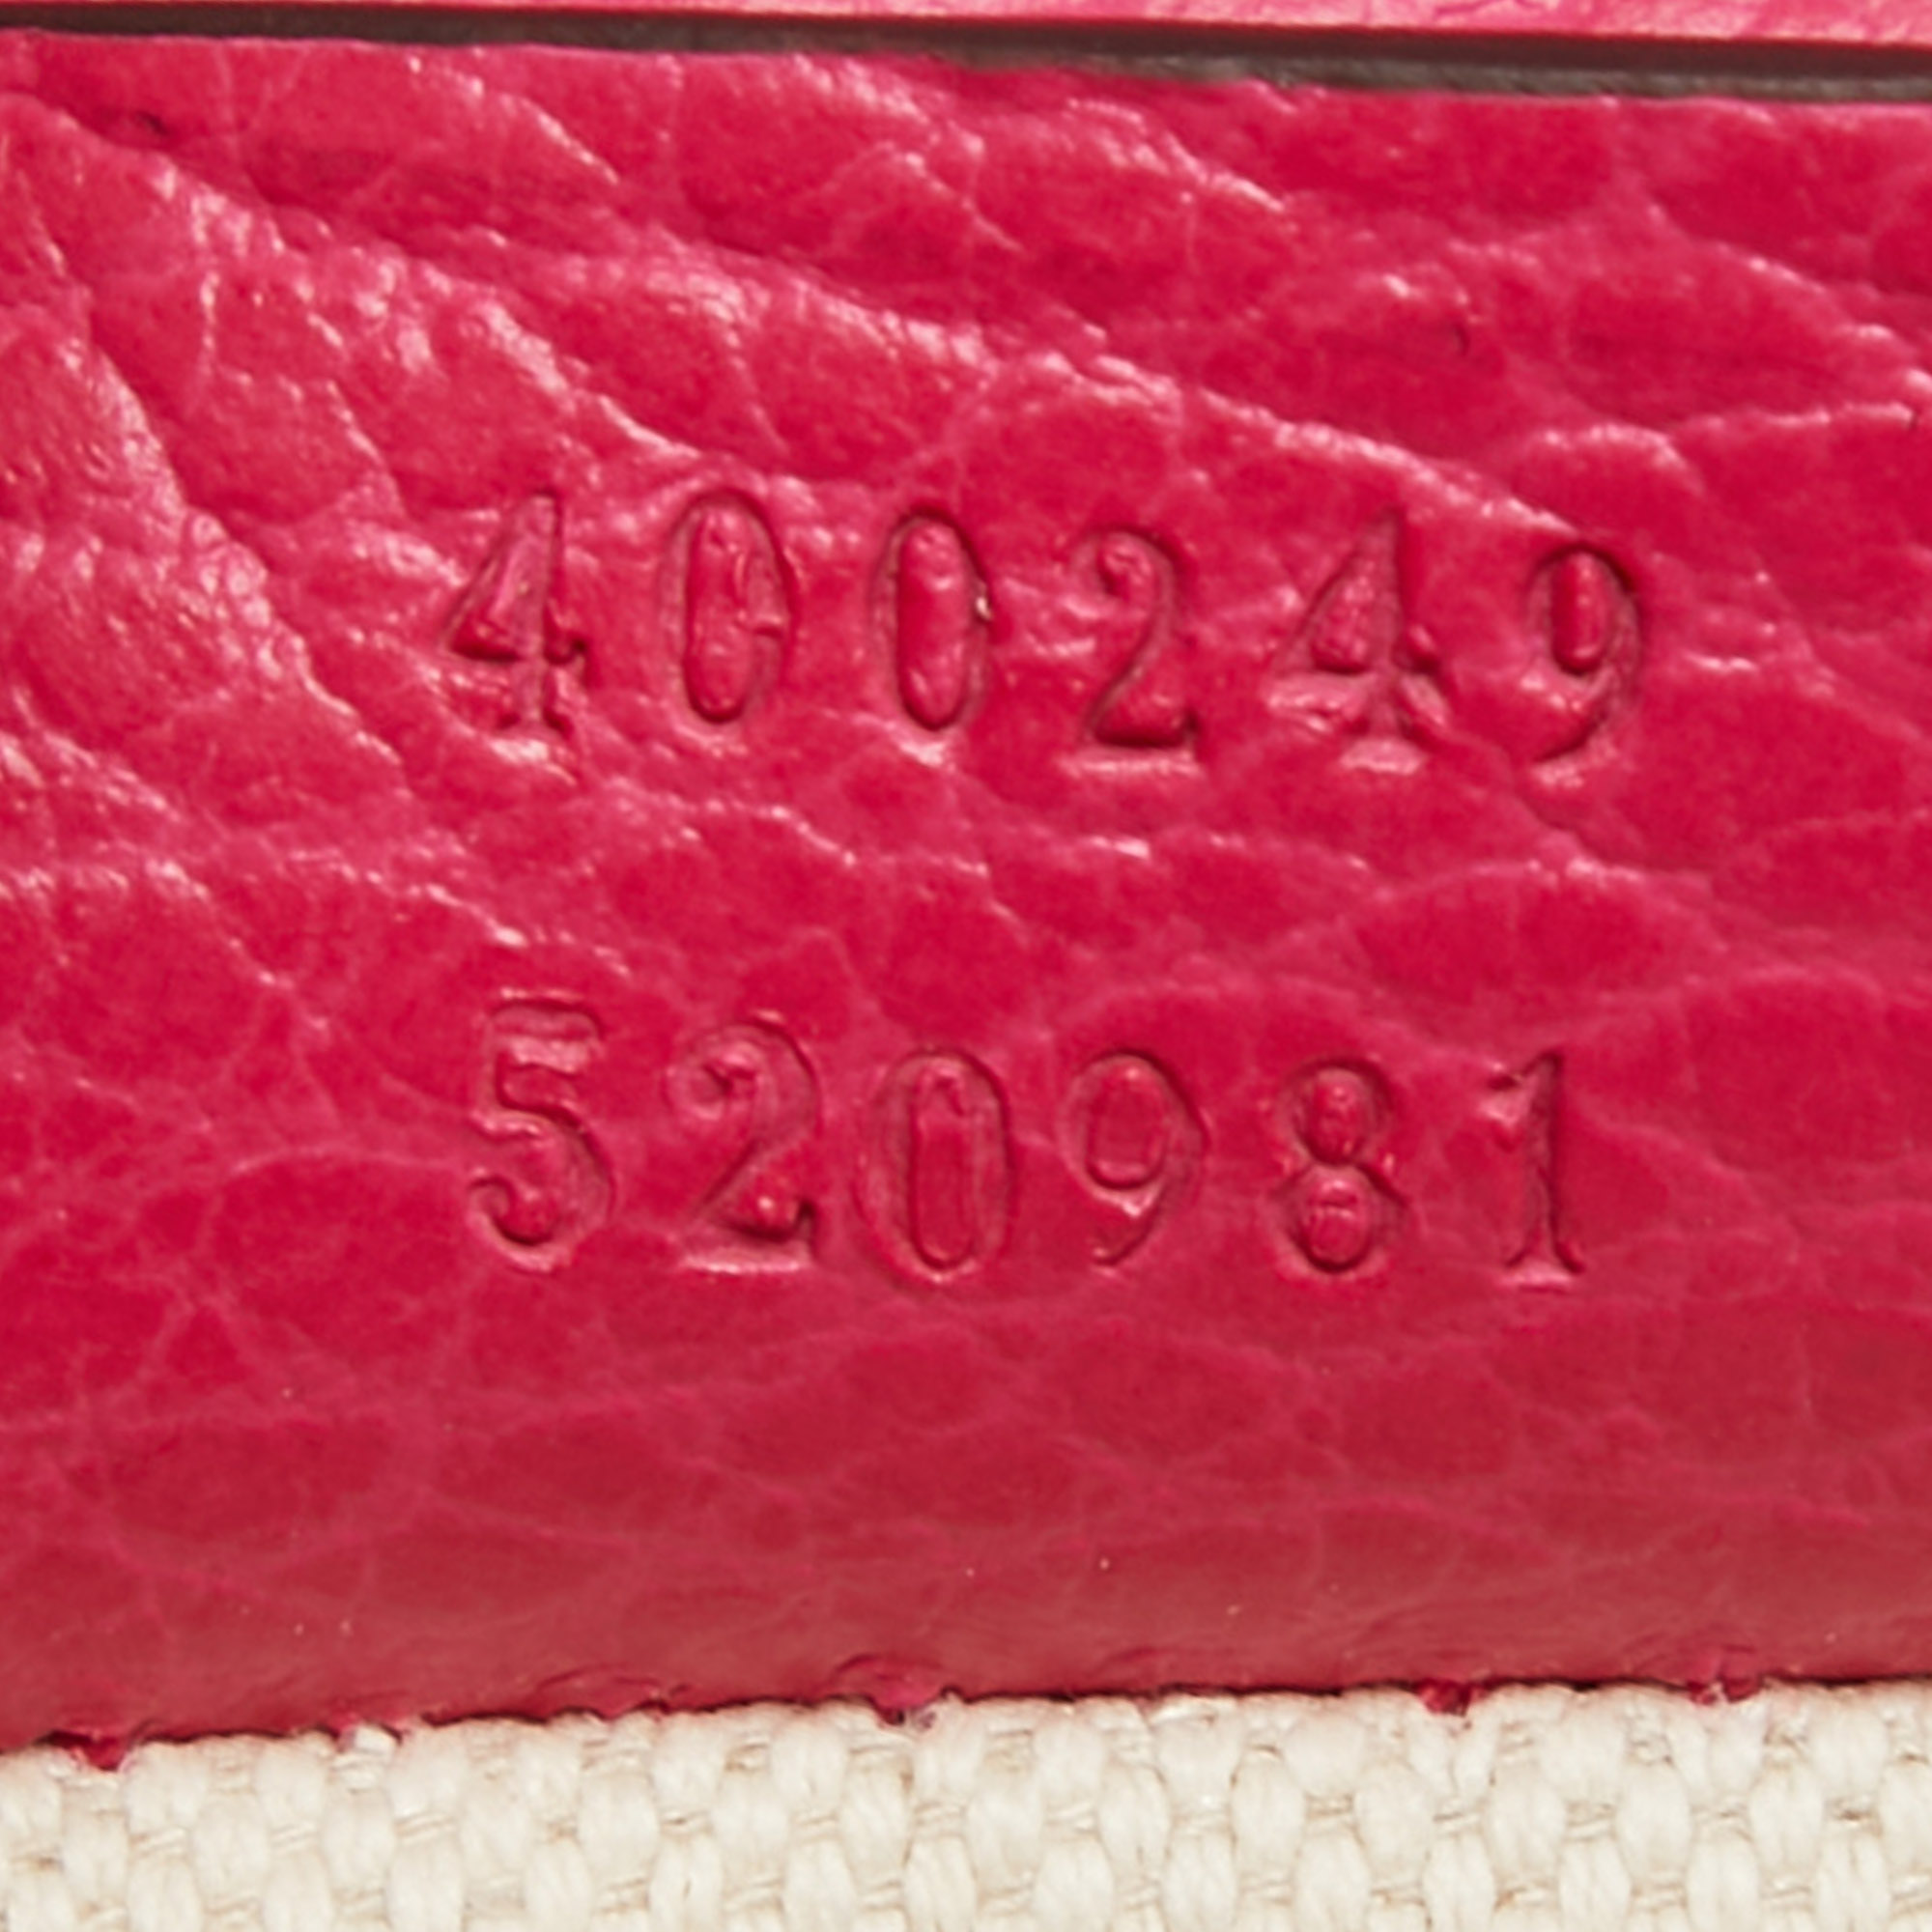 Gucci Magenta Leather Small Guccify Pearl Embellished Dionysus Shoulder Bag